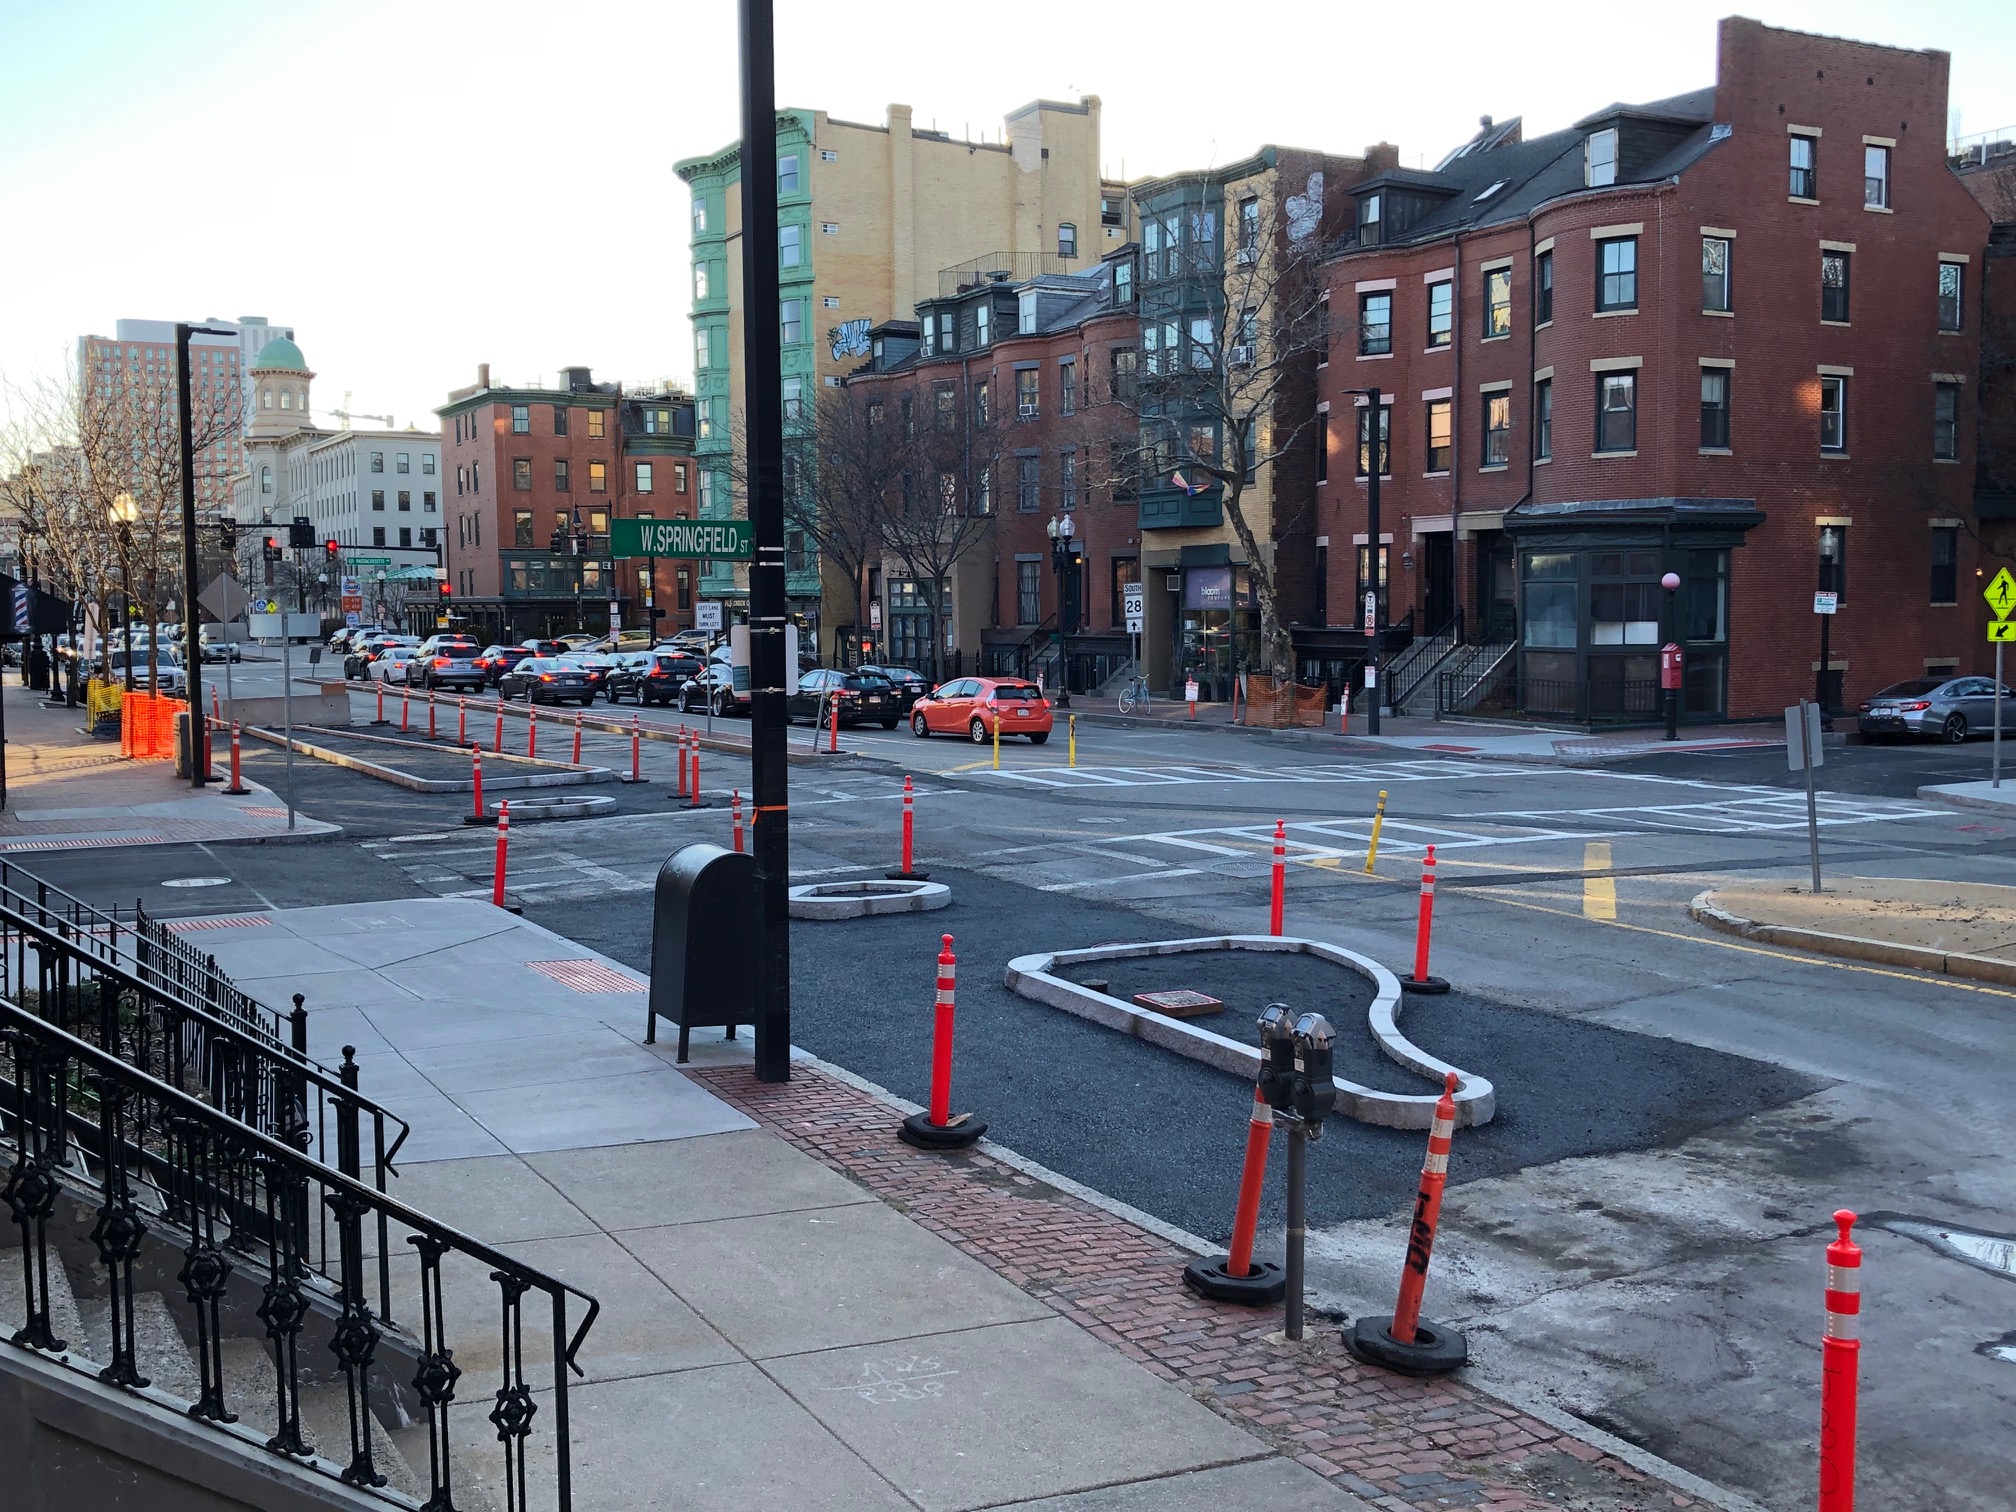 Realigned curbs under construction at the intersection of Tremont Street and West Springfield Street in Boston's South End.